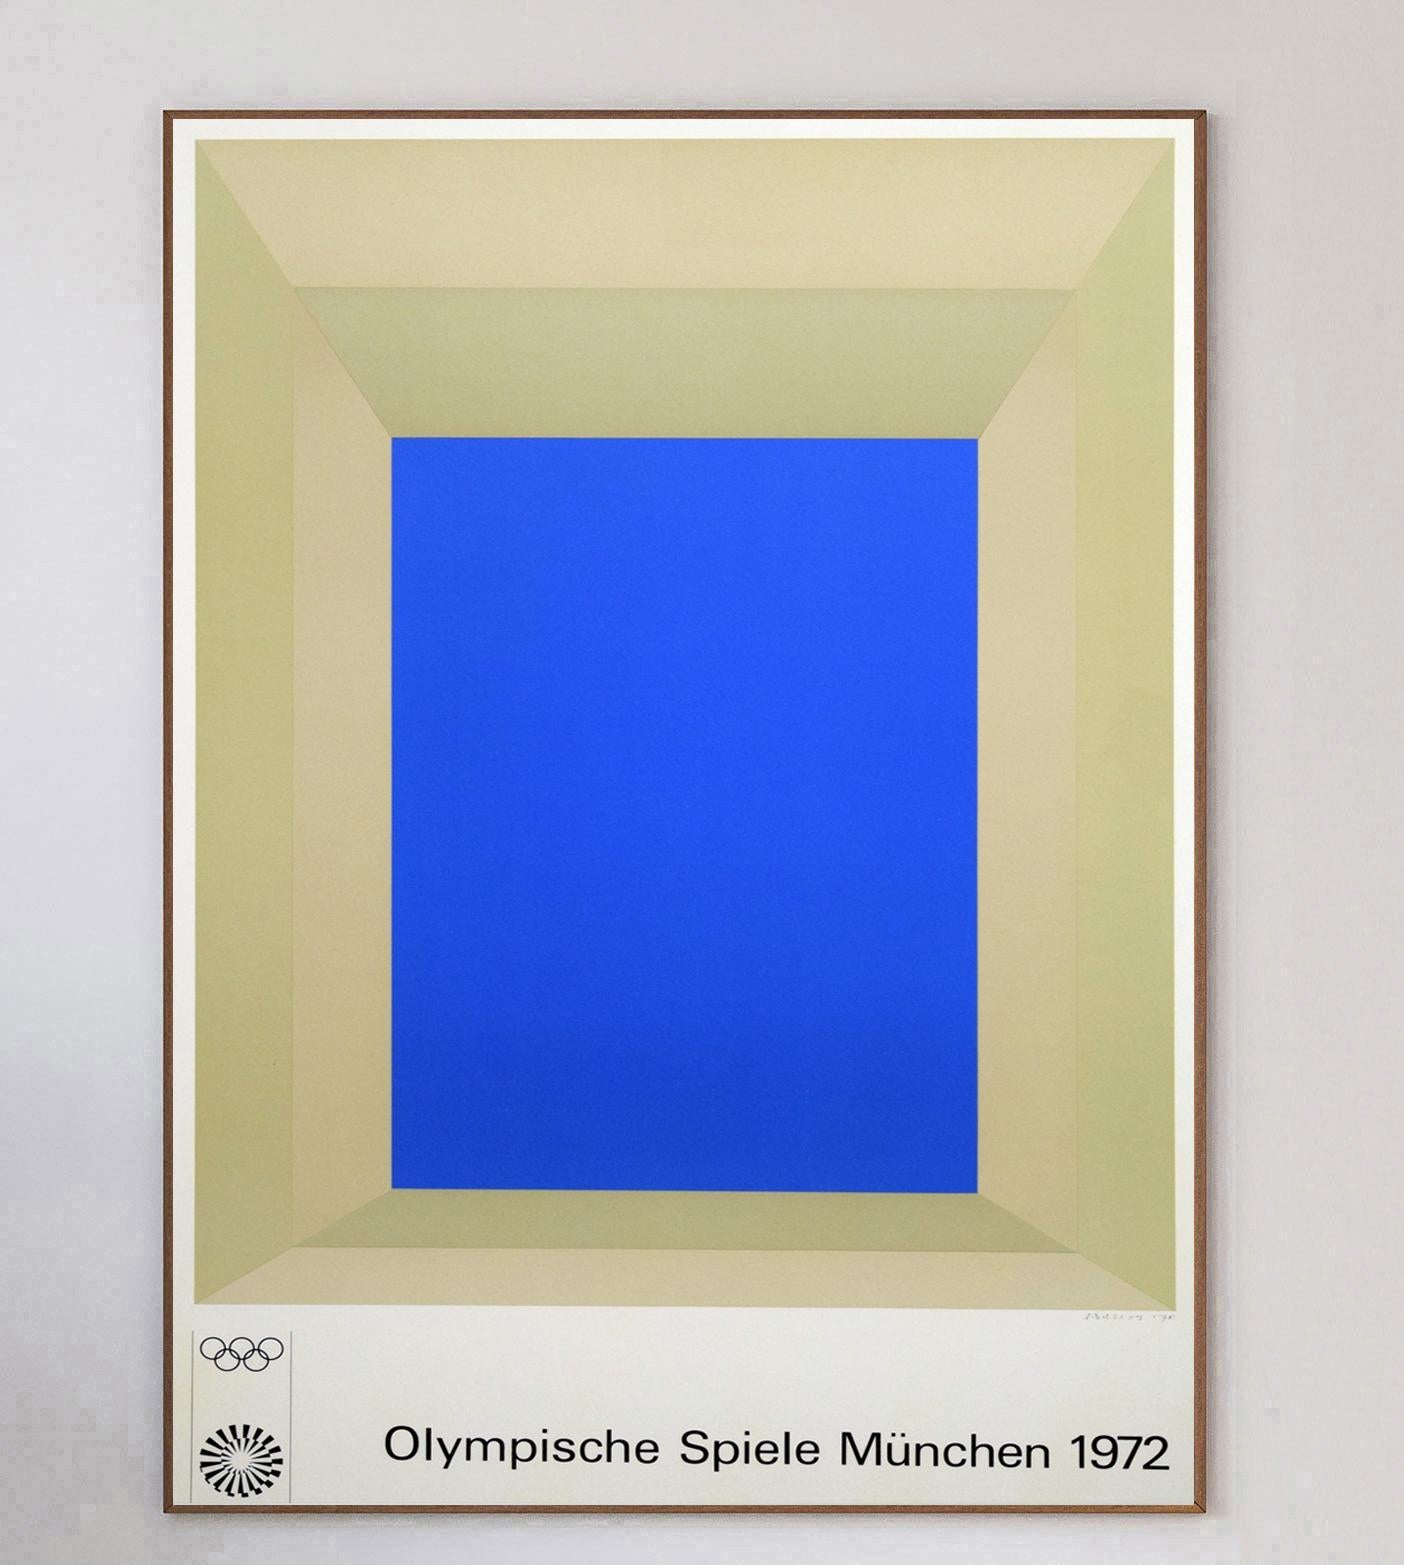 German painter Josef Albers was one of 29 artists commissioned to produce posters for the 1972 Munich Olympic Games. In the run-up to the 1972 Games, the Organising Committee decided to commission a series of Artist Posters to 